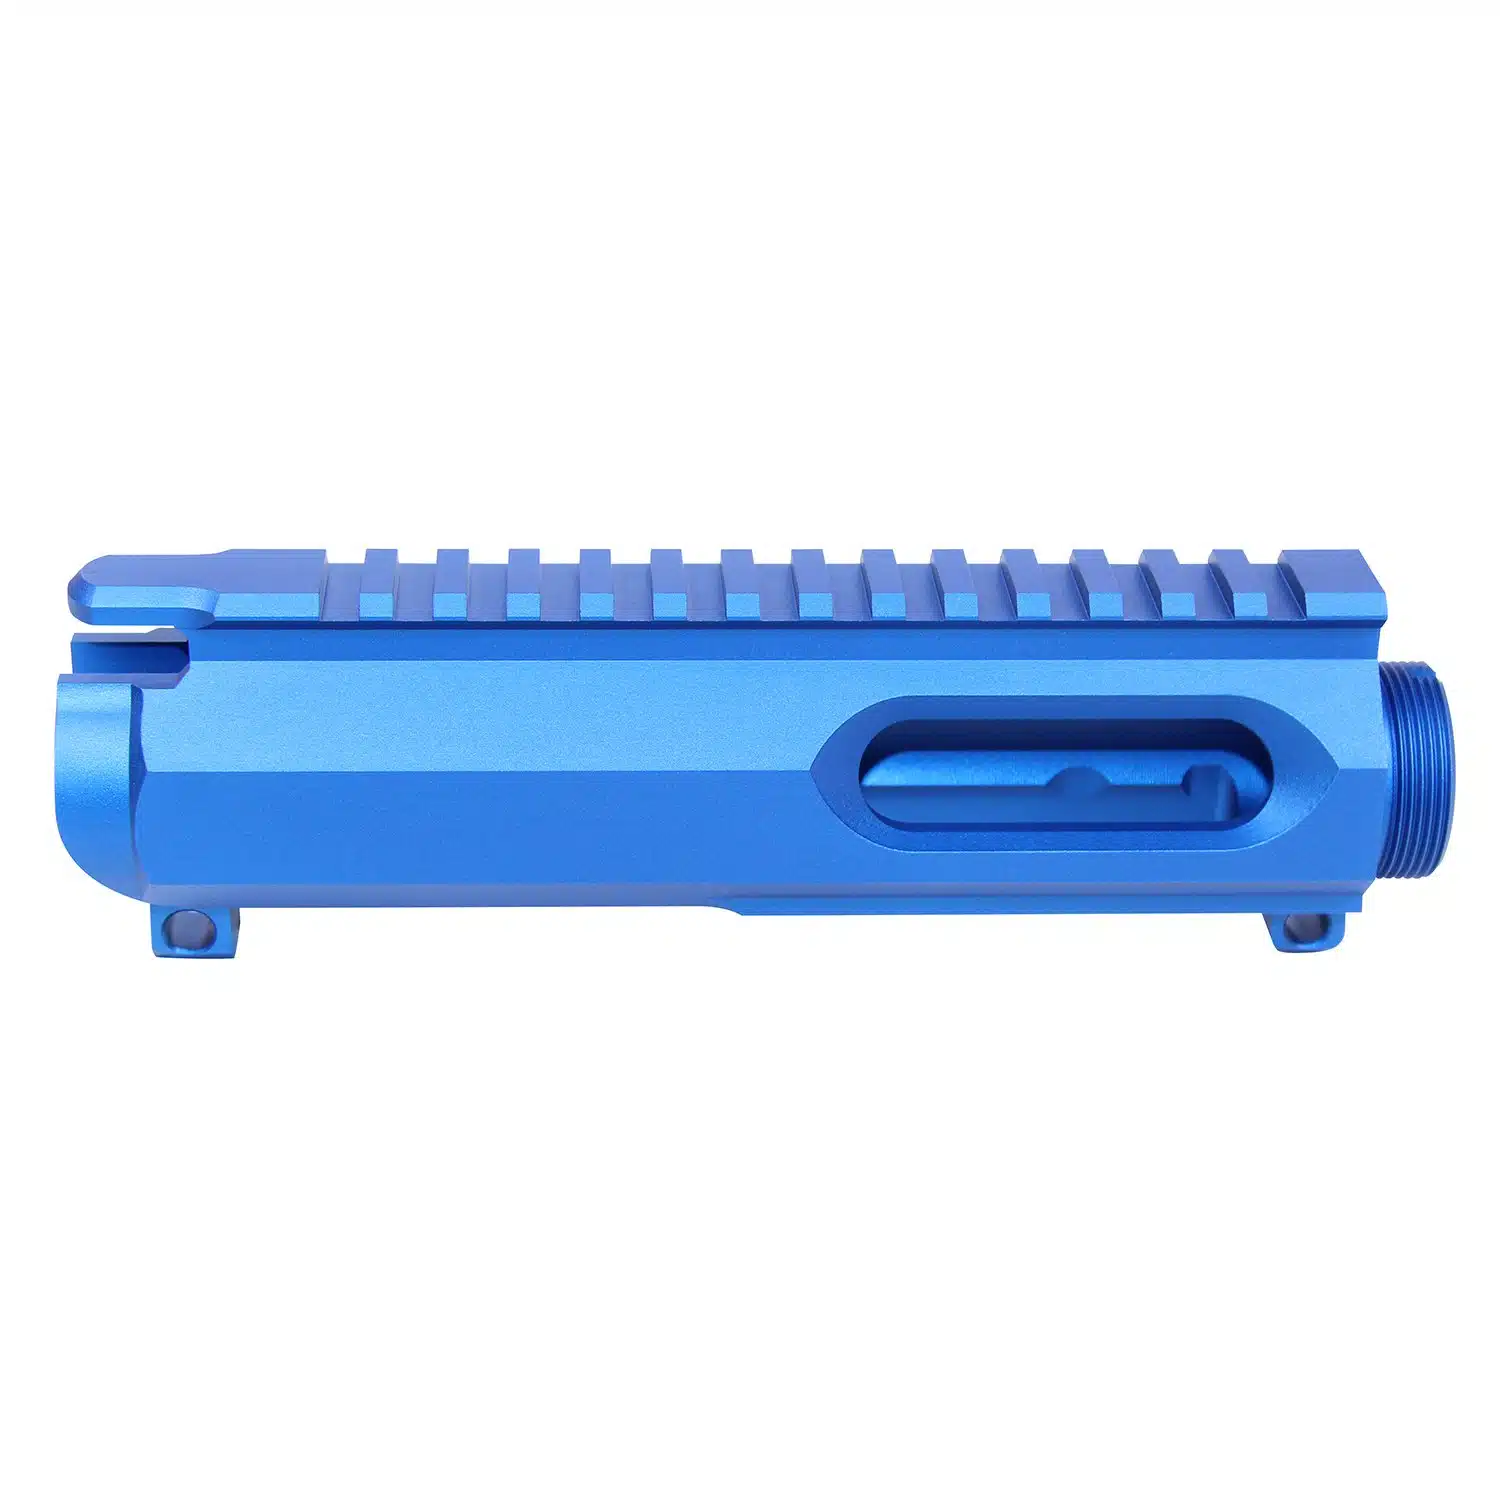 AR-15 9mm Dedicated Stripped Billet Upper Receiver in Anodized Blue